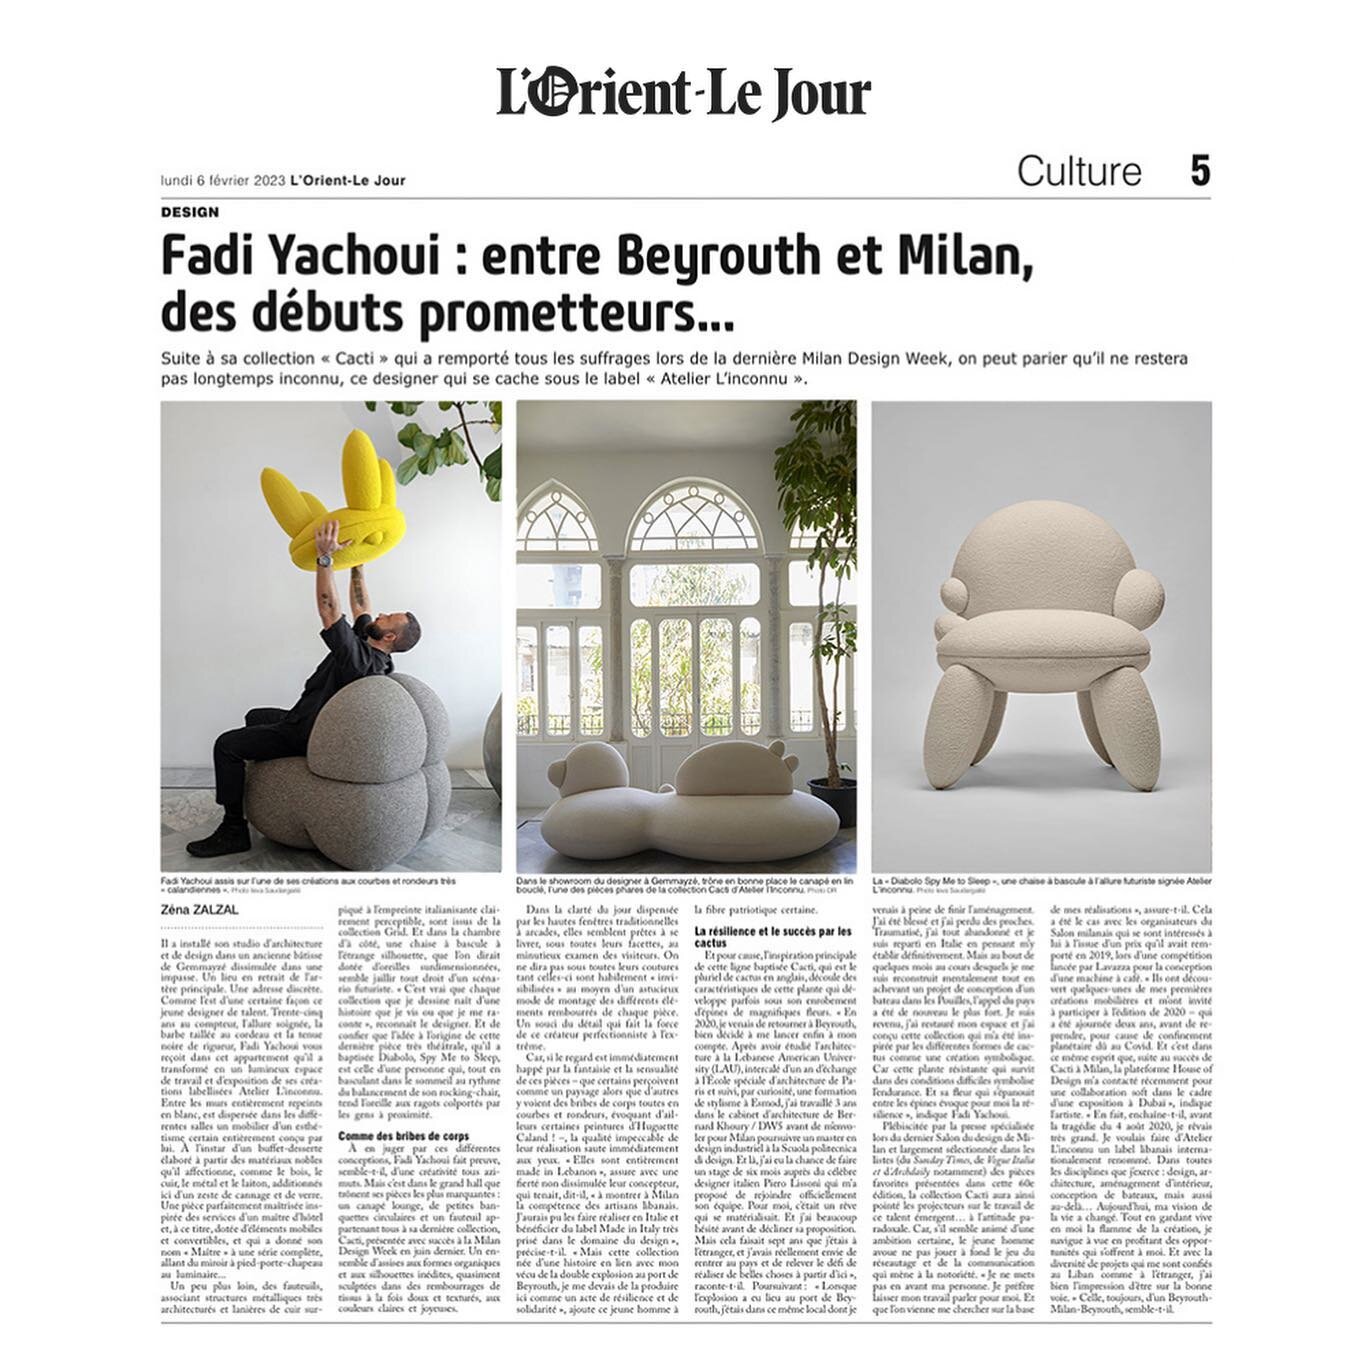 Featured in @lorientlejour_olj Thank you @zenazalzal for this beautiful article! 
&bull;
&bull;
&bull;
https://www.lorientlejour.com/article/1327185/fadi-yachoui-entre-beyrouth-et-milan-des-debuts-prometteurs.html

#linconnu #atelierlinconnu